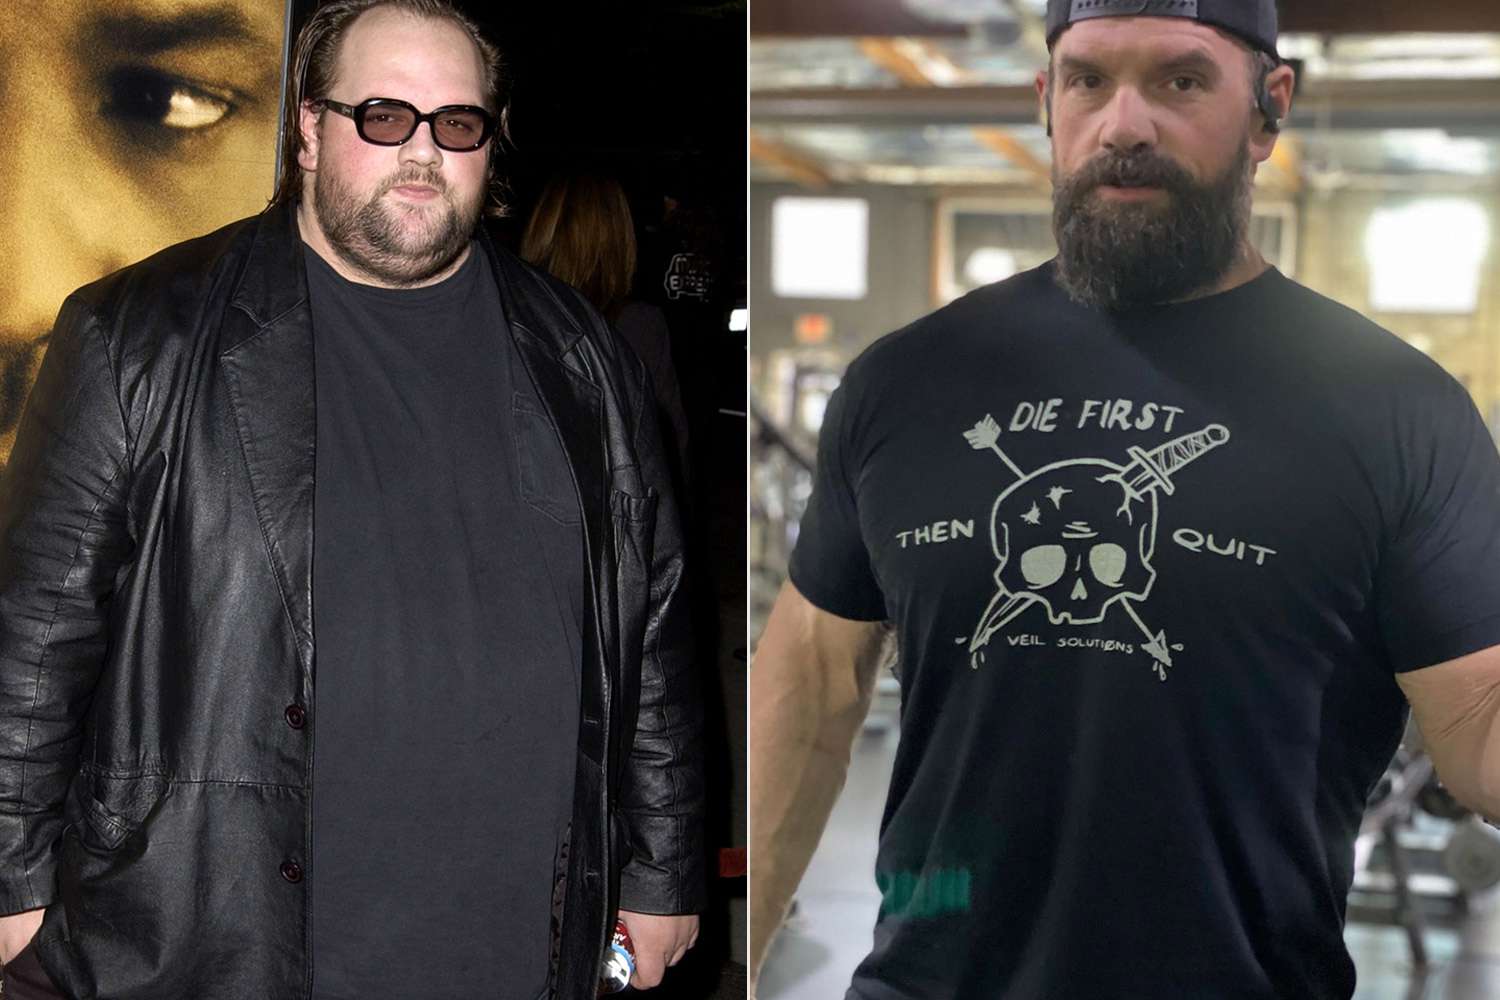 My Name Is Earl Star Ethan Suplee Leaves Fans Stunned After His Massive Weight Loss